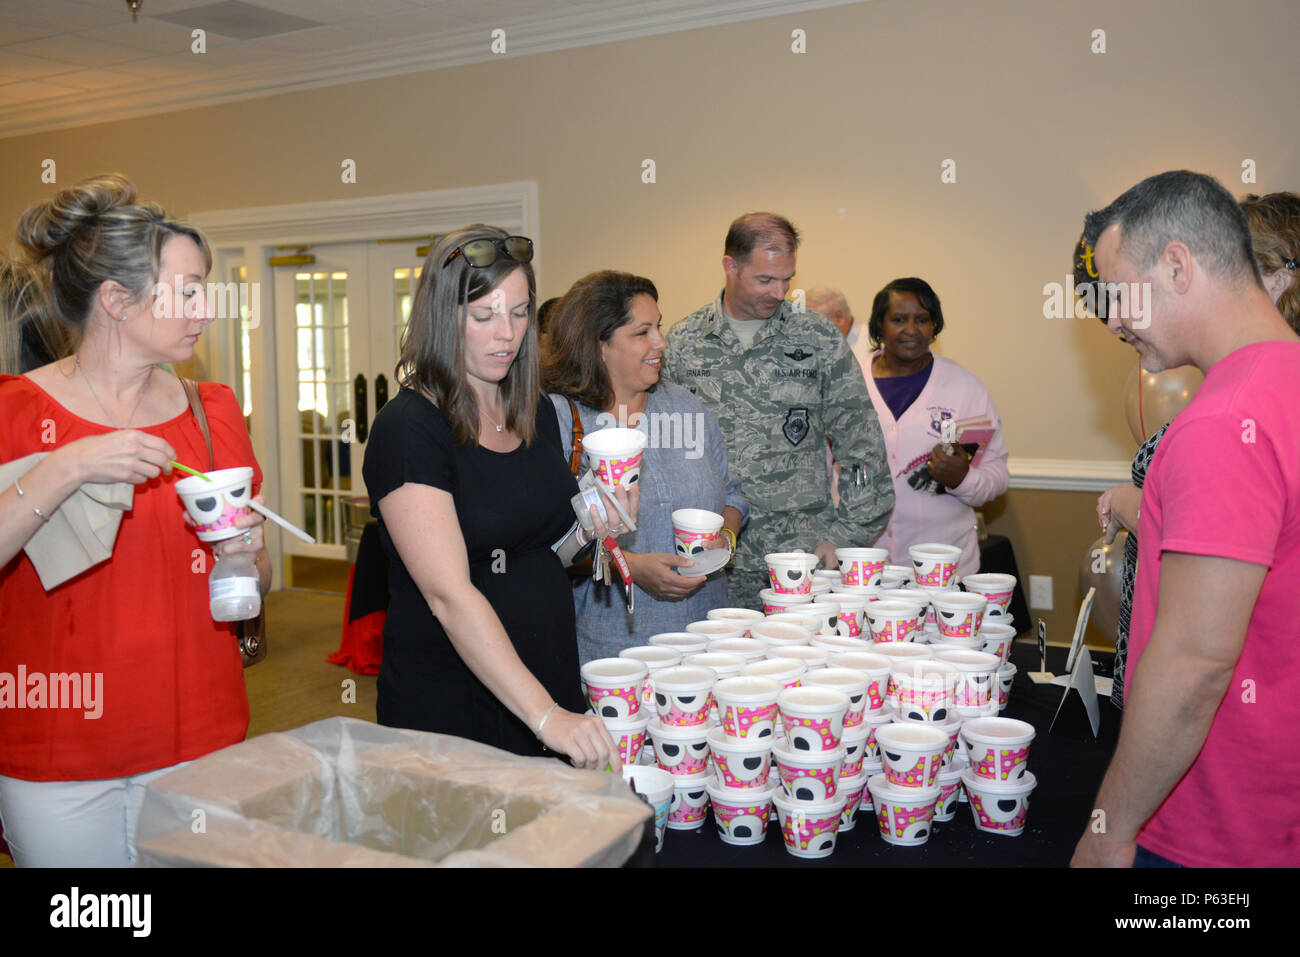 Attendees at the Volunteer Appreciation Event participate in an ice cream social after the ceremony, April 20, 2016, at Seymour Johnson Air Force Base, North Carolina. An array of desserts, including ice cream and cake, was provided to celebrate the hard work of volunteers. (U.S. Air Force photo by Airman 1st Class Ashley Williamson/Released) Stock Photo